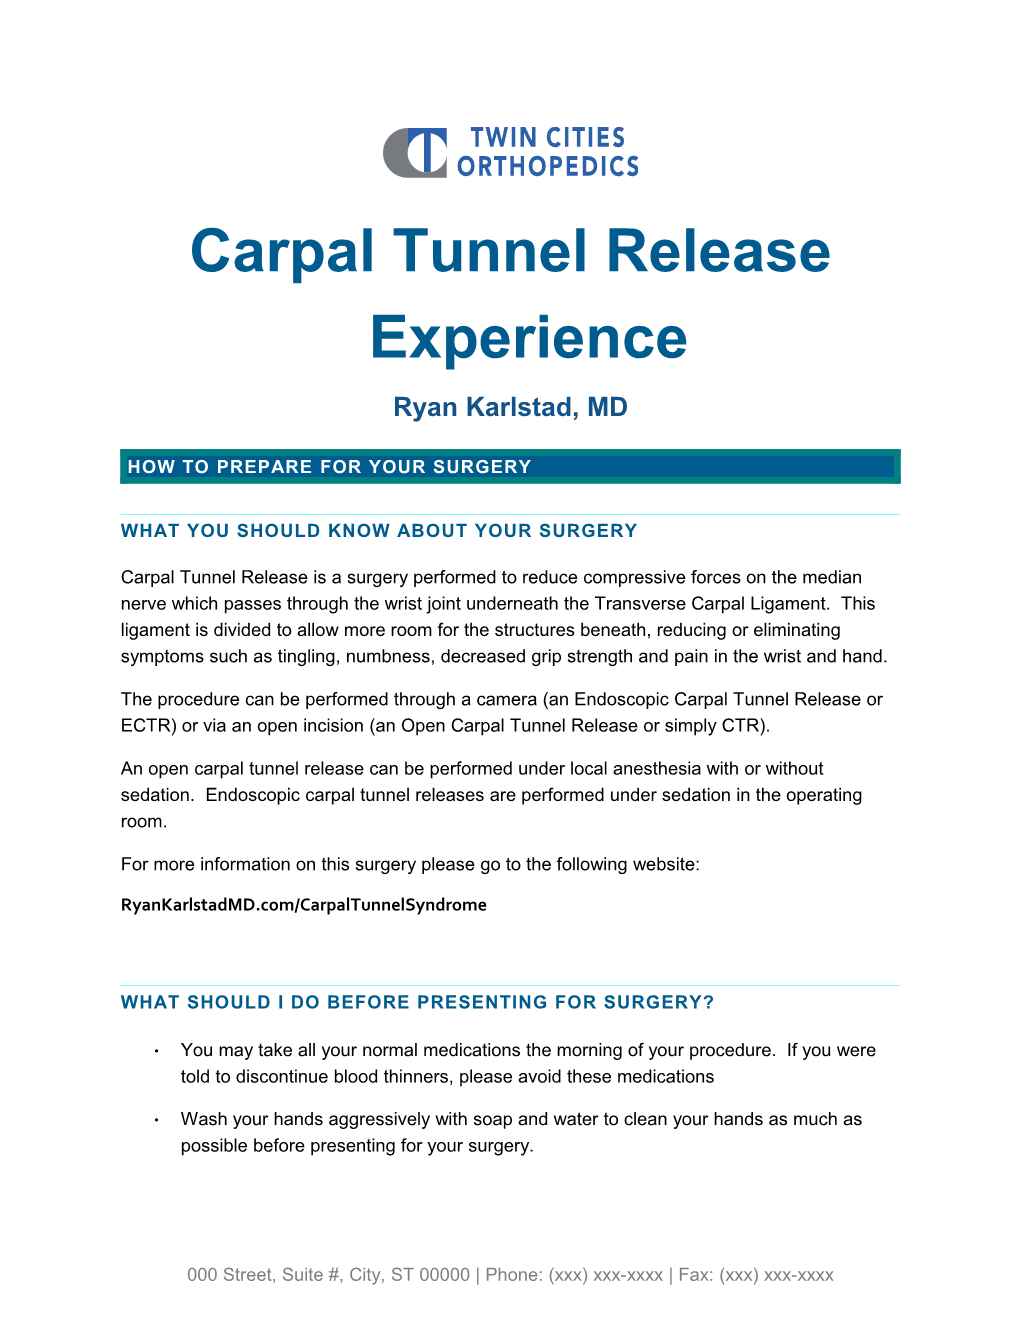 Carpal Tunnel Release Experience